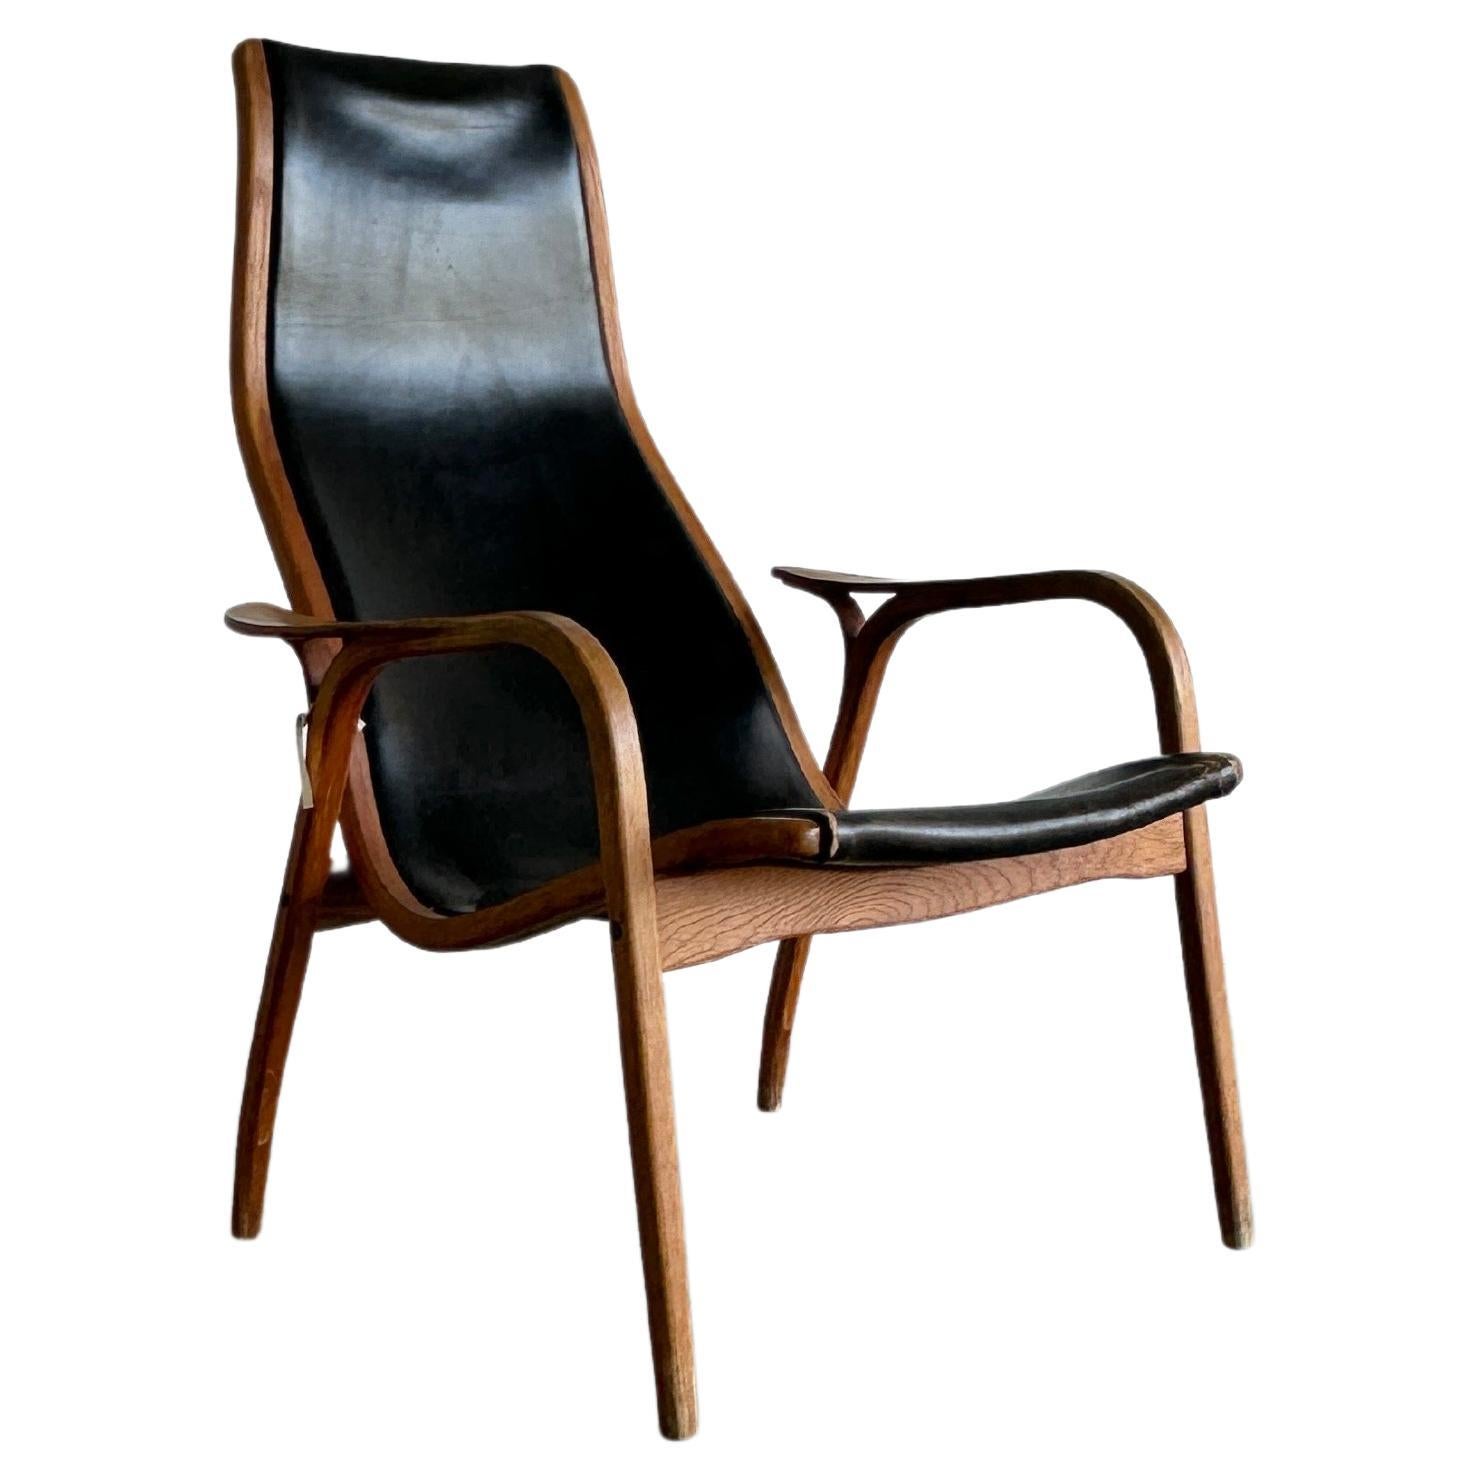 Original black leather Lamino lounge chair by Yngve Ekström for Swedese